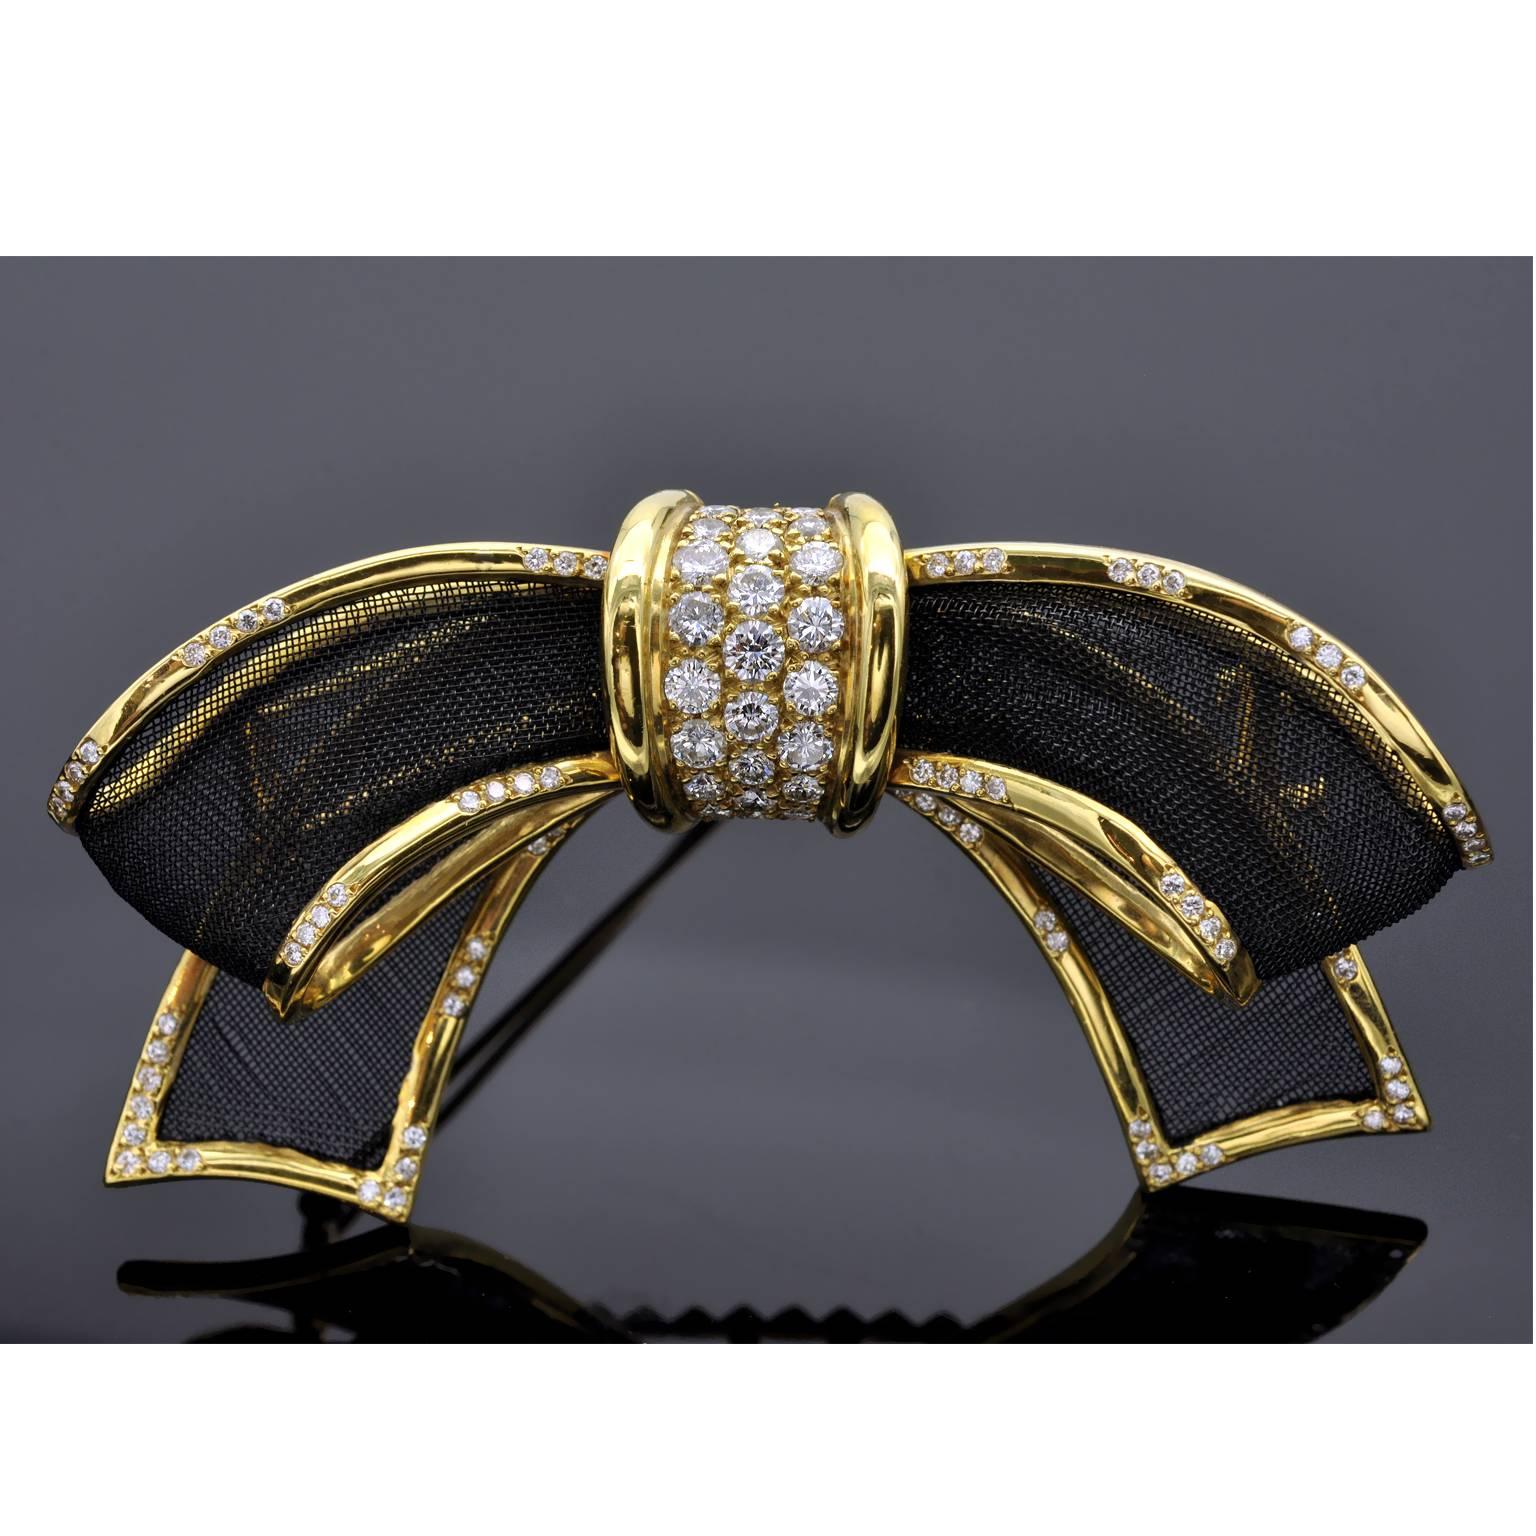 This is an extraordinary brooch ! The bow is made of blackened Gold fabric in a shiny yellow gold frame highlighted with diamonds .  The central Element is richly pave-set with diamonds ( up to 0,15 carat each ) nearly touching each other. On the